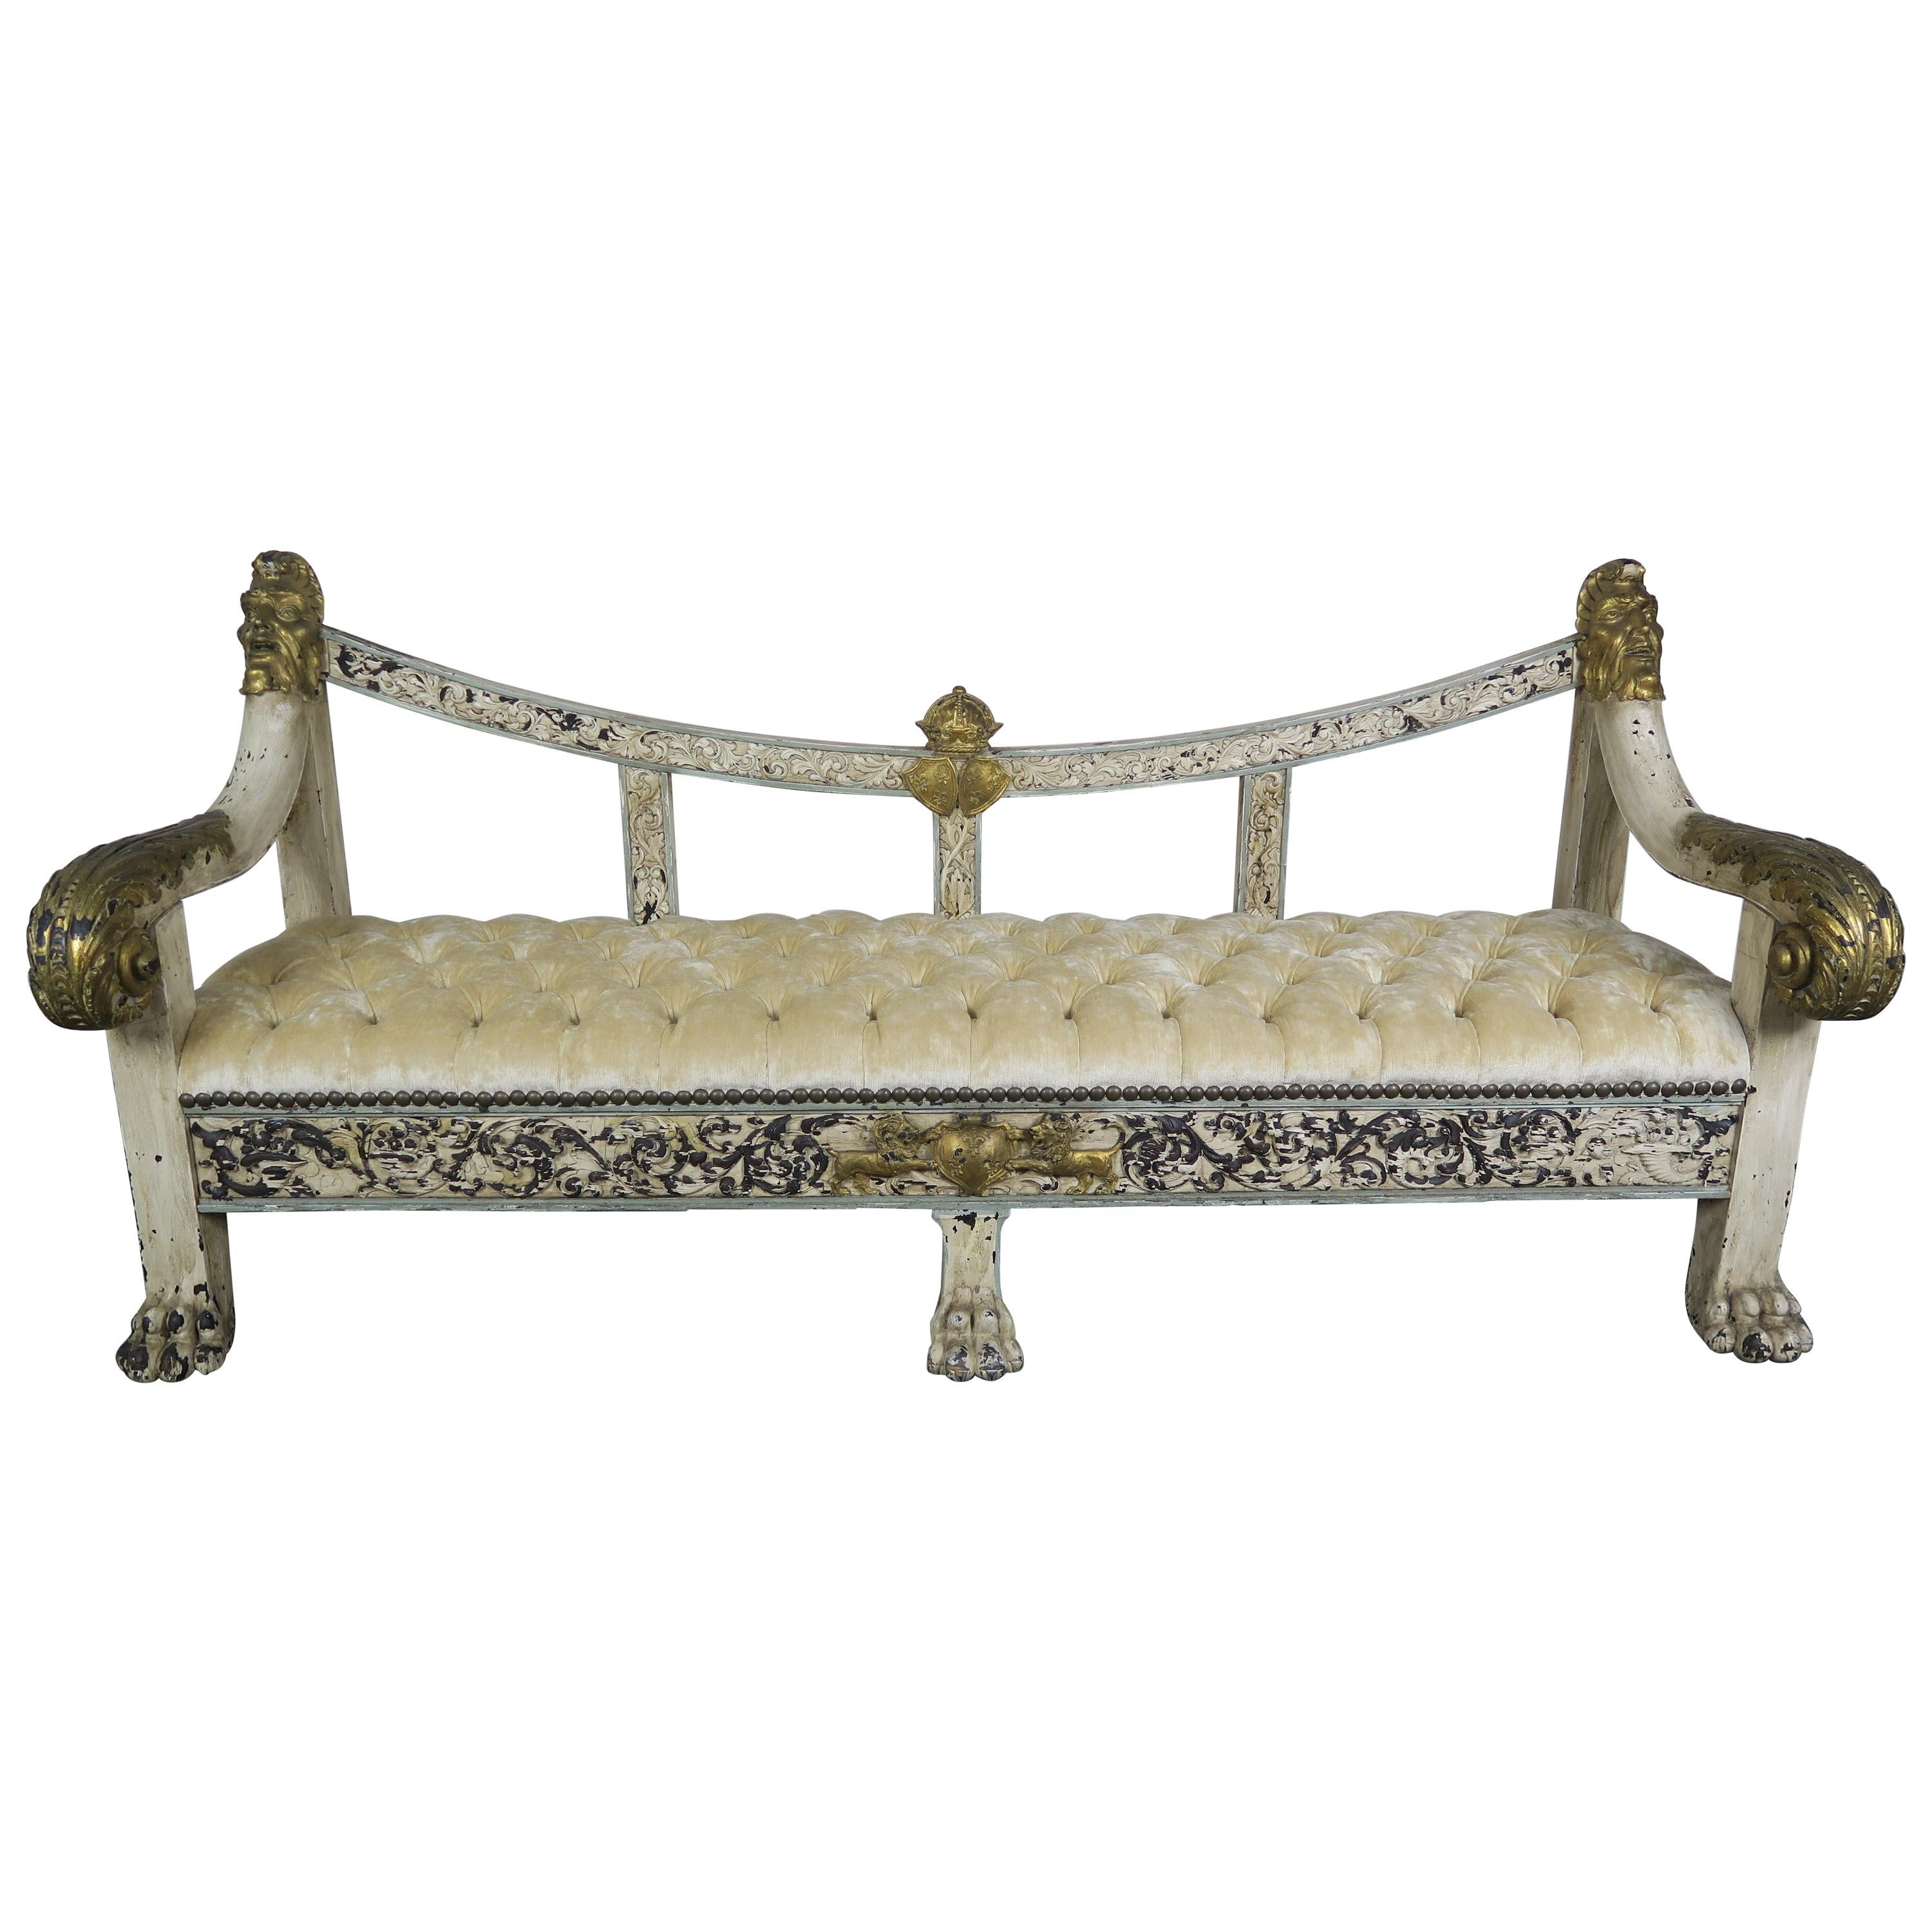 19th Century Spanish Baroque Painted and Parcel-Gilt Bench with Lion Feet